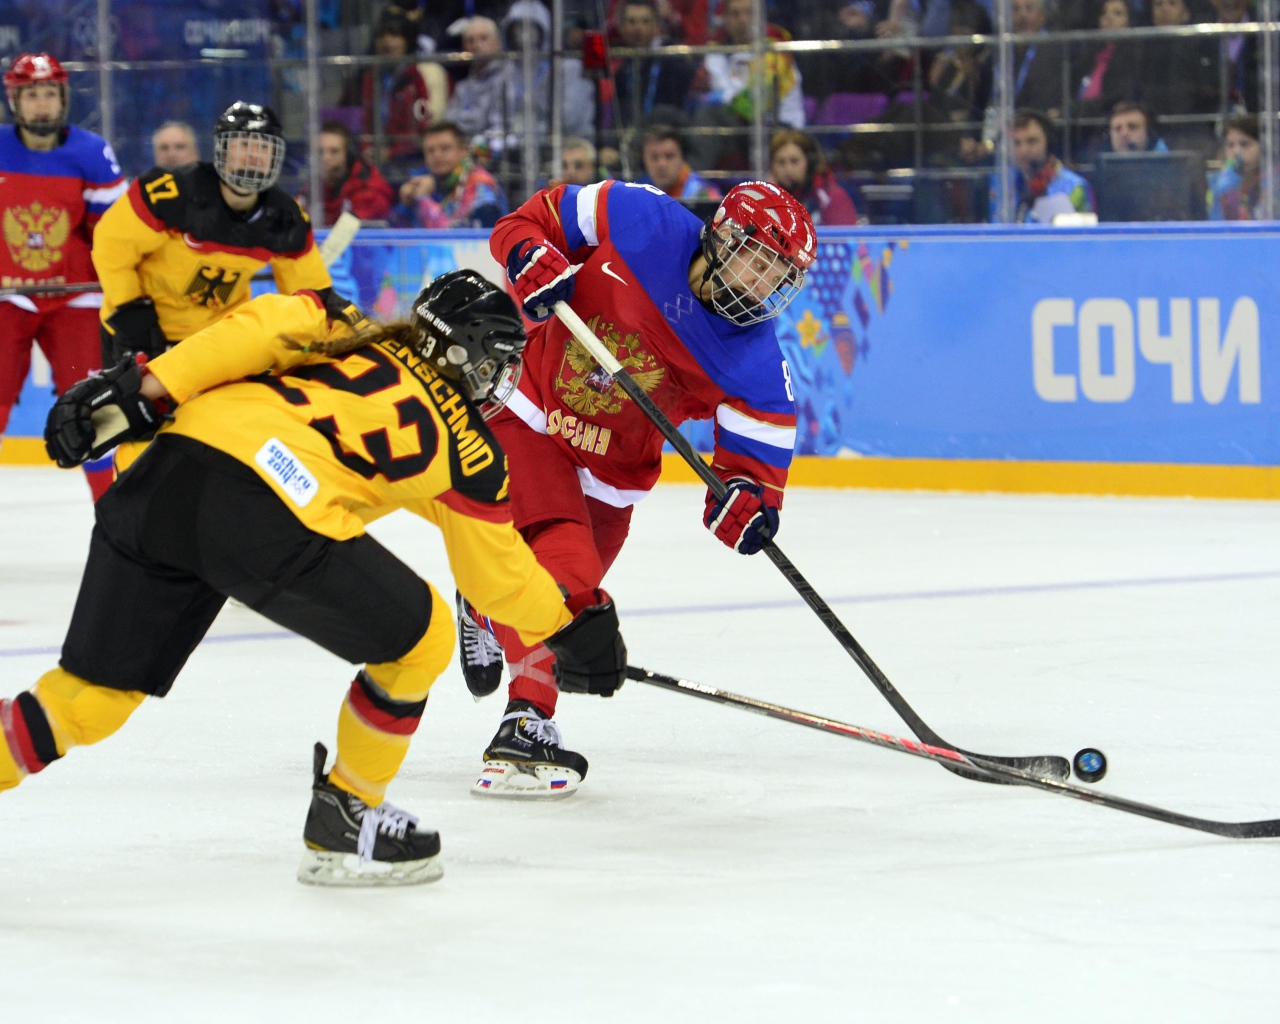 Fighting for the puck in ice hockey at the Olympic Games in Sochi